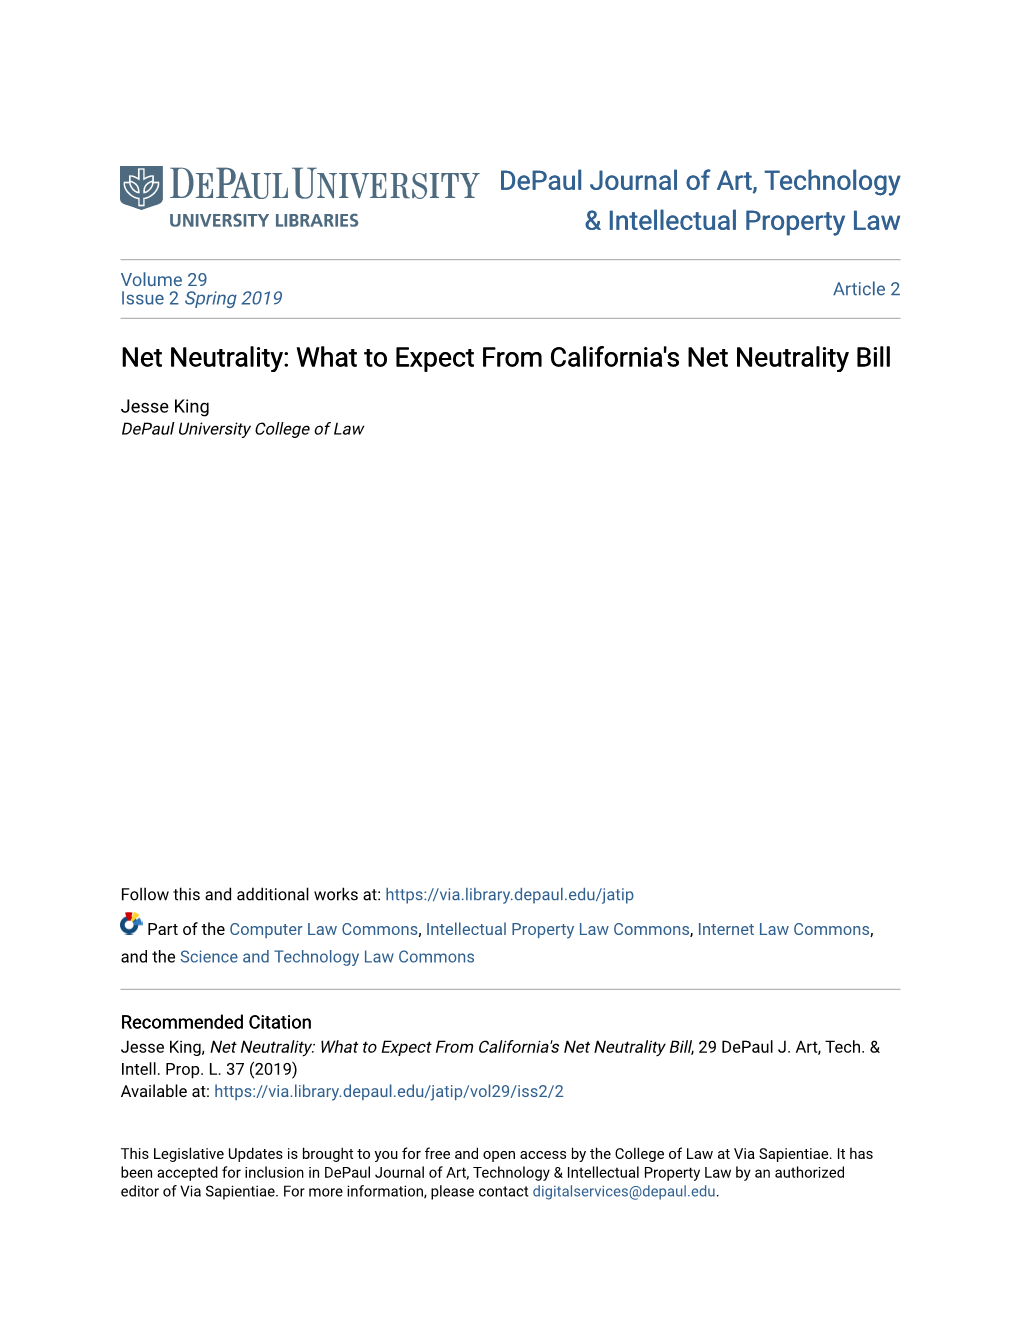 Net Neutrality: What to Expect from California's Net Neutrality Bill